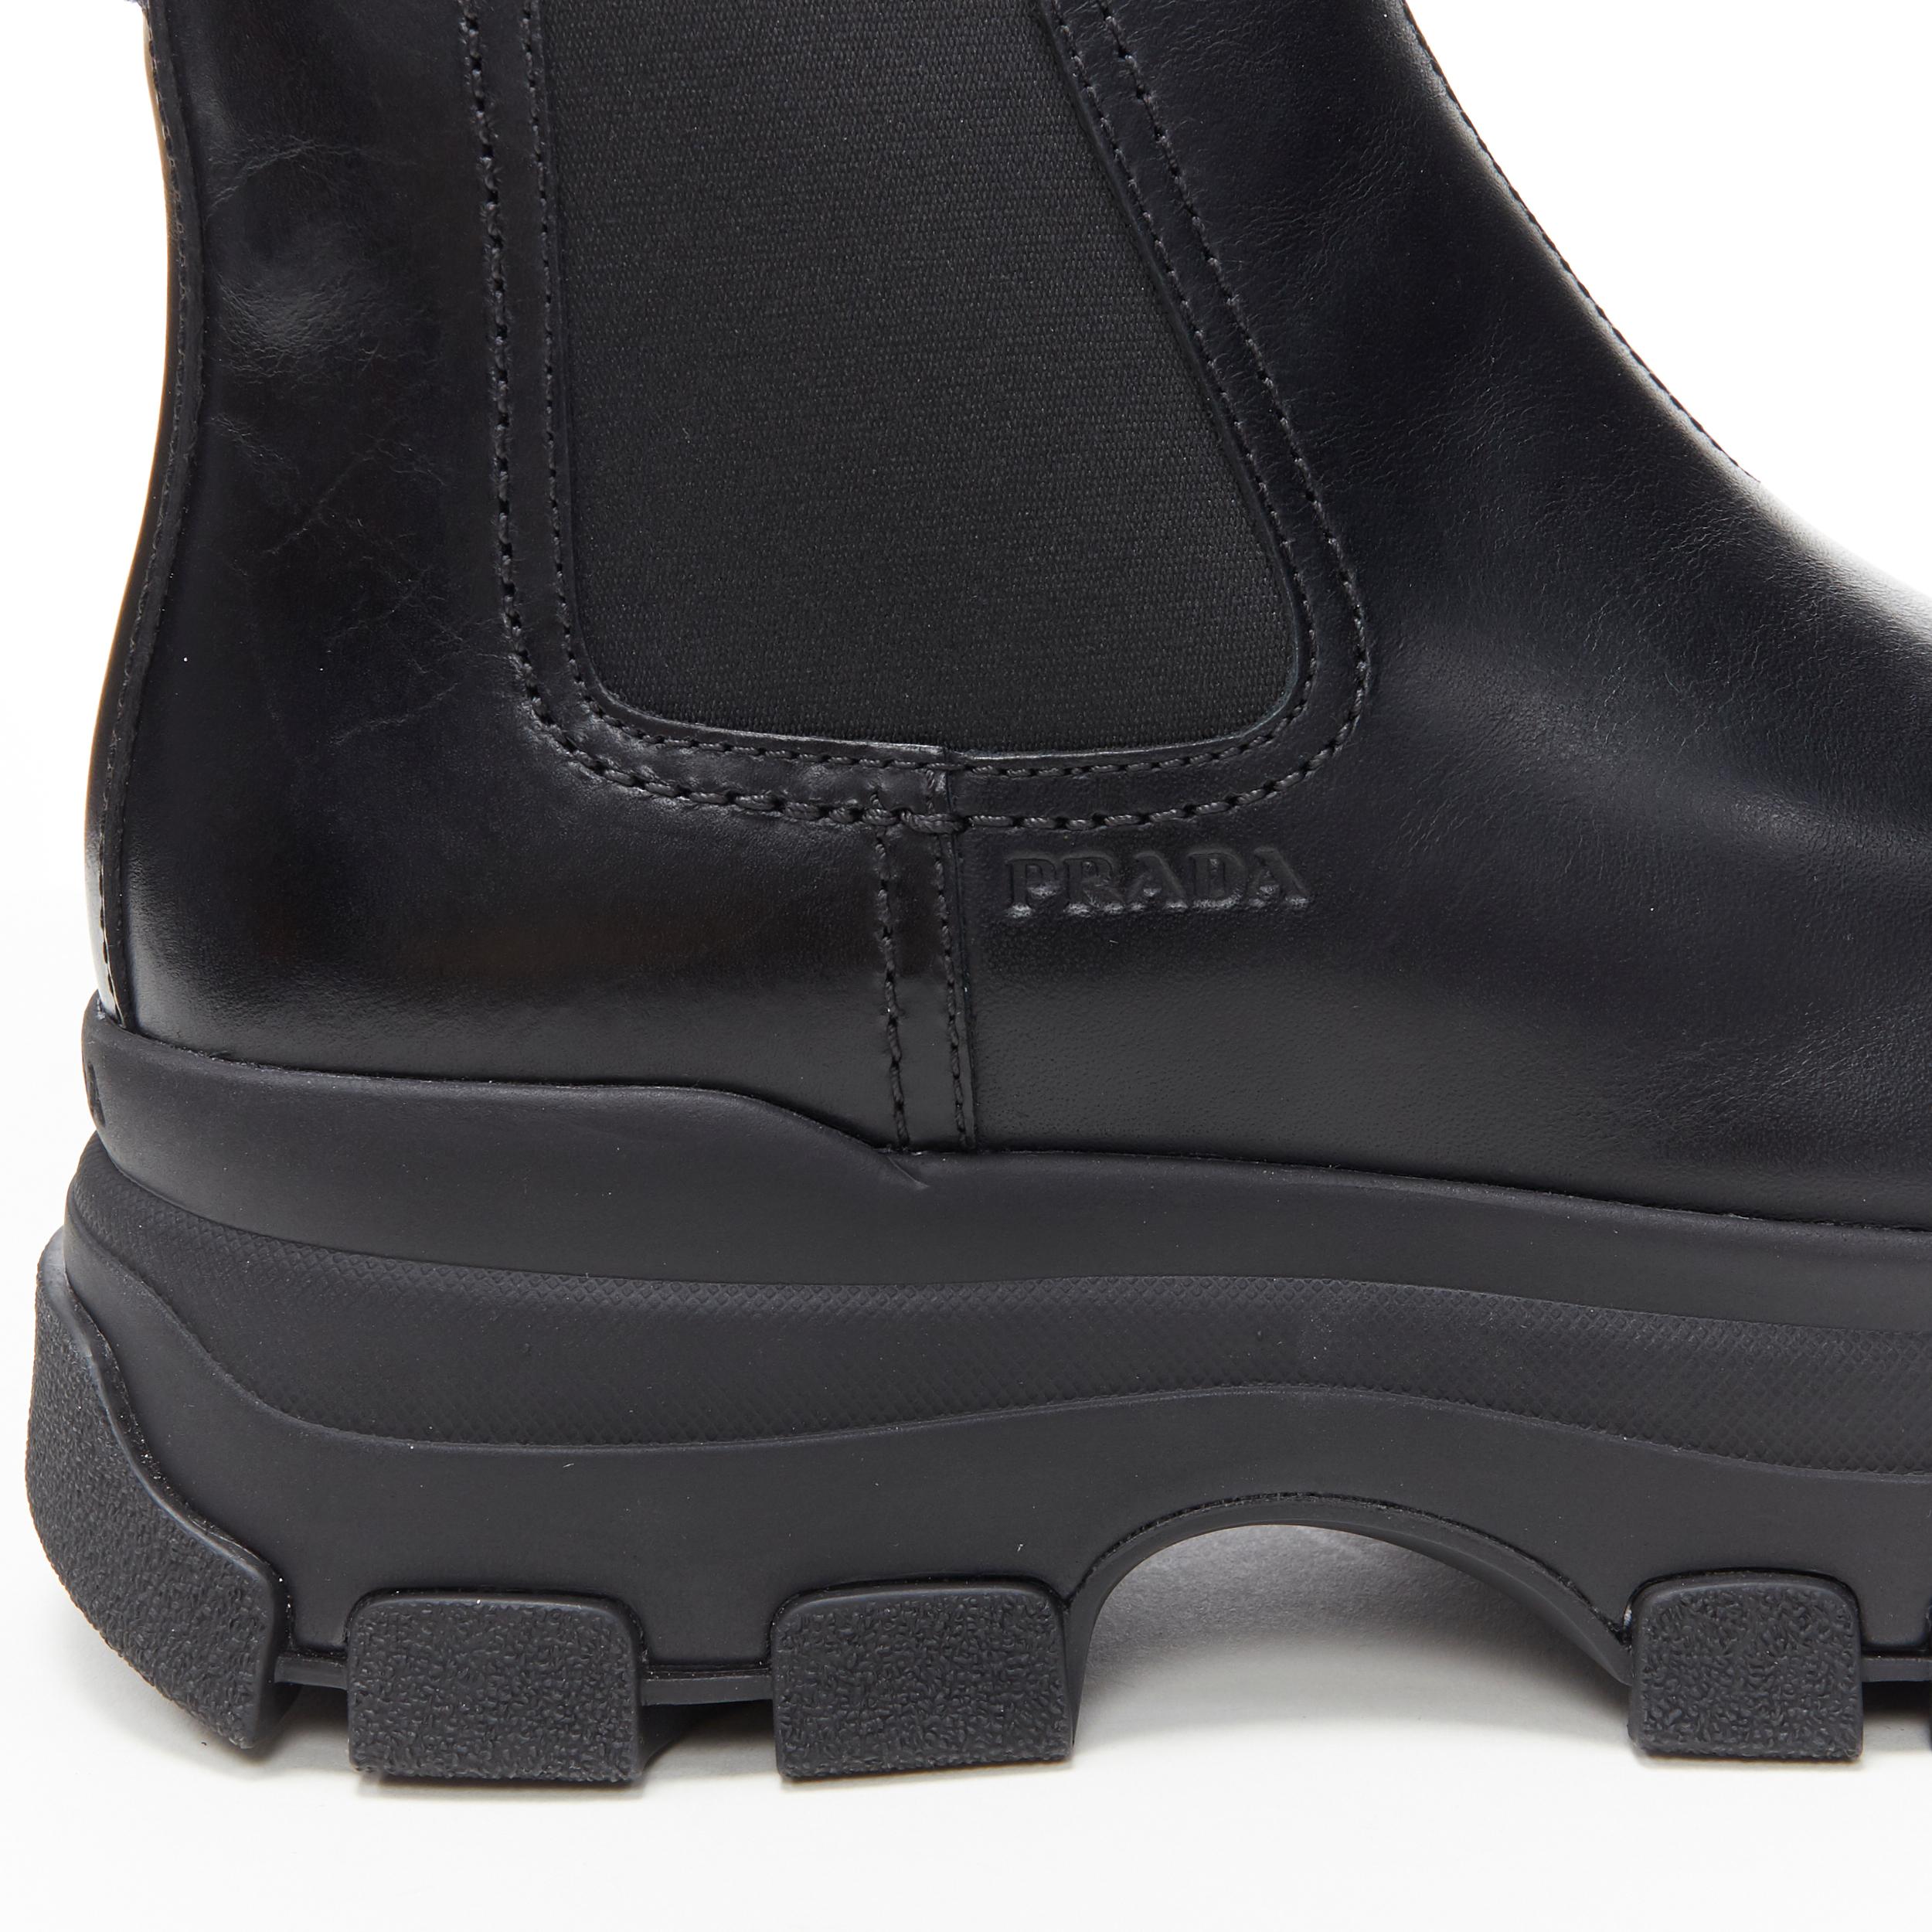 new PRADA 2019 Pull Up black leather Monolith chunky lug sole boot UK9 EU43
Brand: Prada
Designer: Miuccia Prada
Model Name / Style: Pull UP boot
Material: Leather
Color: Black
Pattern: Solid
Extra Detail: 2019 STYLE 